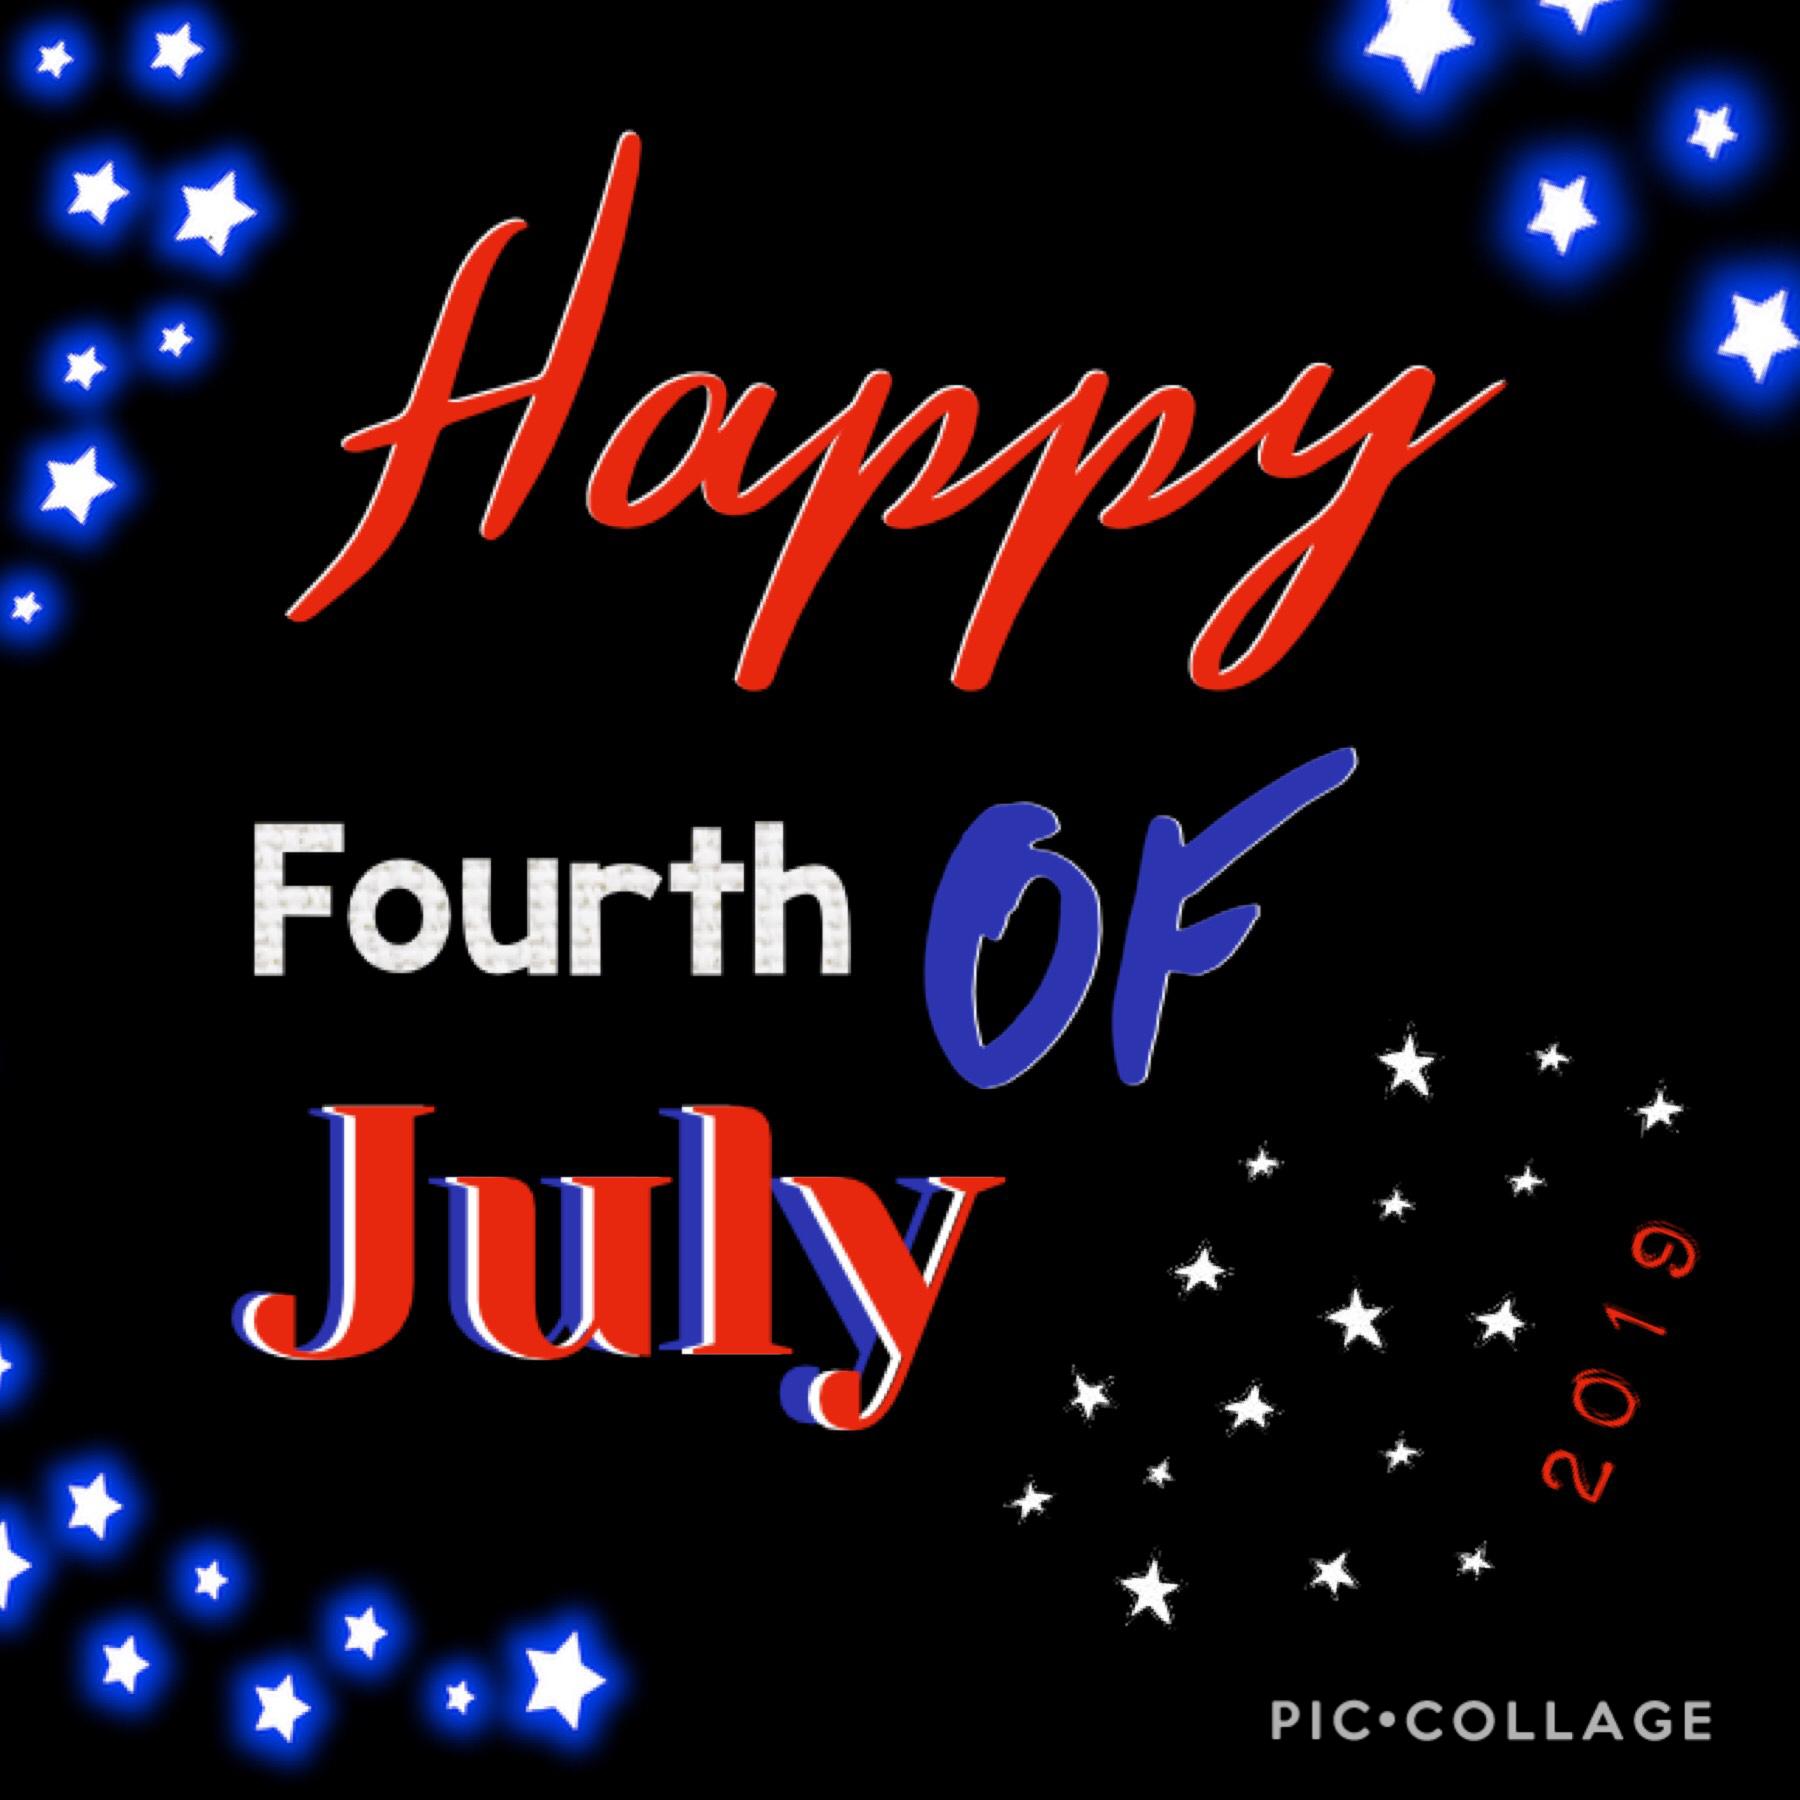 Happy 4th of July❗️🤩 🇺🇸 🍦 🎆 💙 🦅 🎈 🌟 🍽 🎊 🗽 🎶 I went to my cousins’ for a cookout earlier today, we went swimming. 🤽🏻‍♀️💦 🌭 And then tonight I did some mini fireworks and stuff, so it was a pretty good day. 🎇 What did y’all do? 🧐 I’ve been so tireddd. 💤 